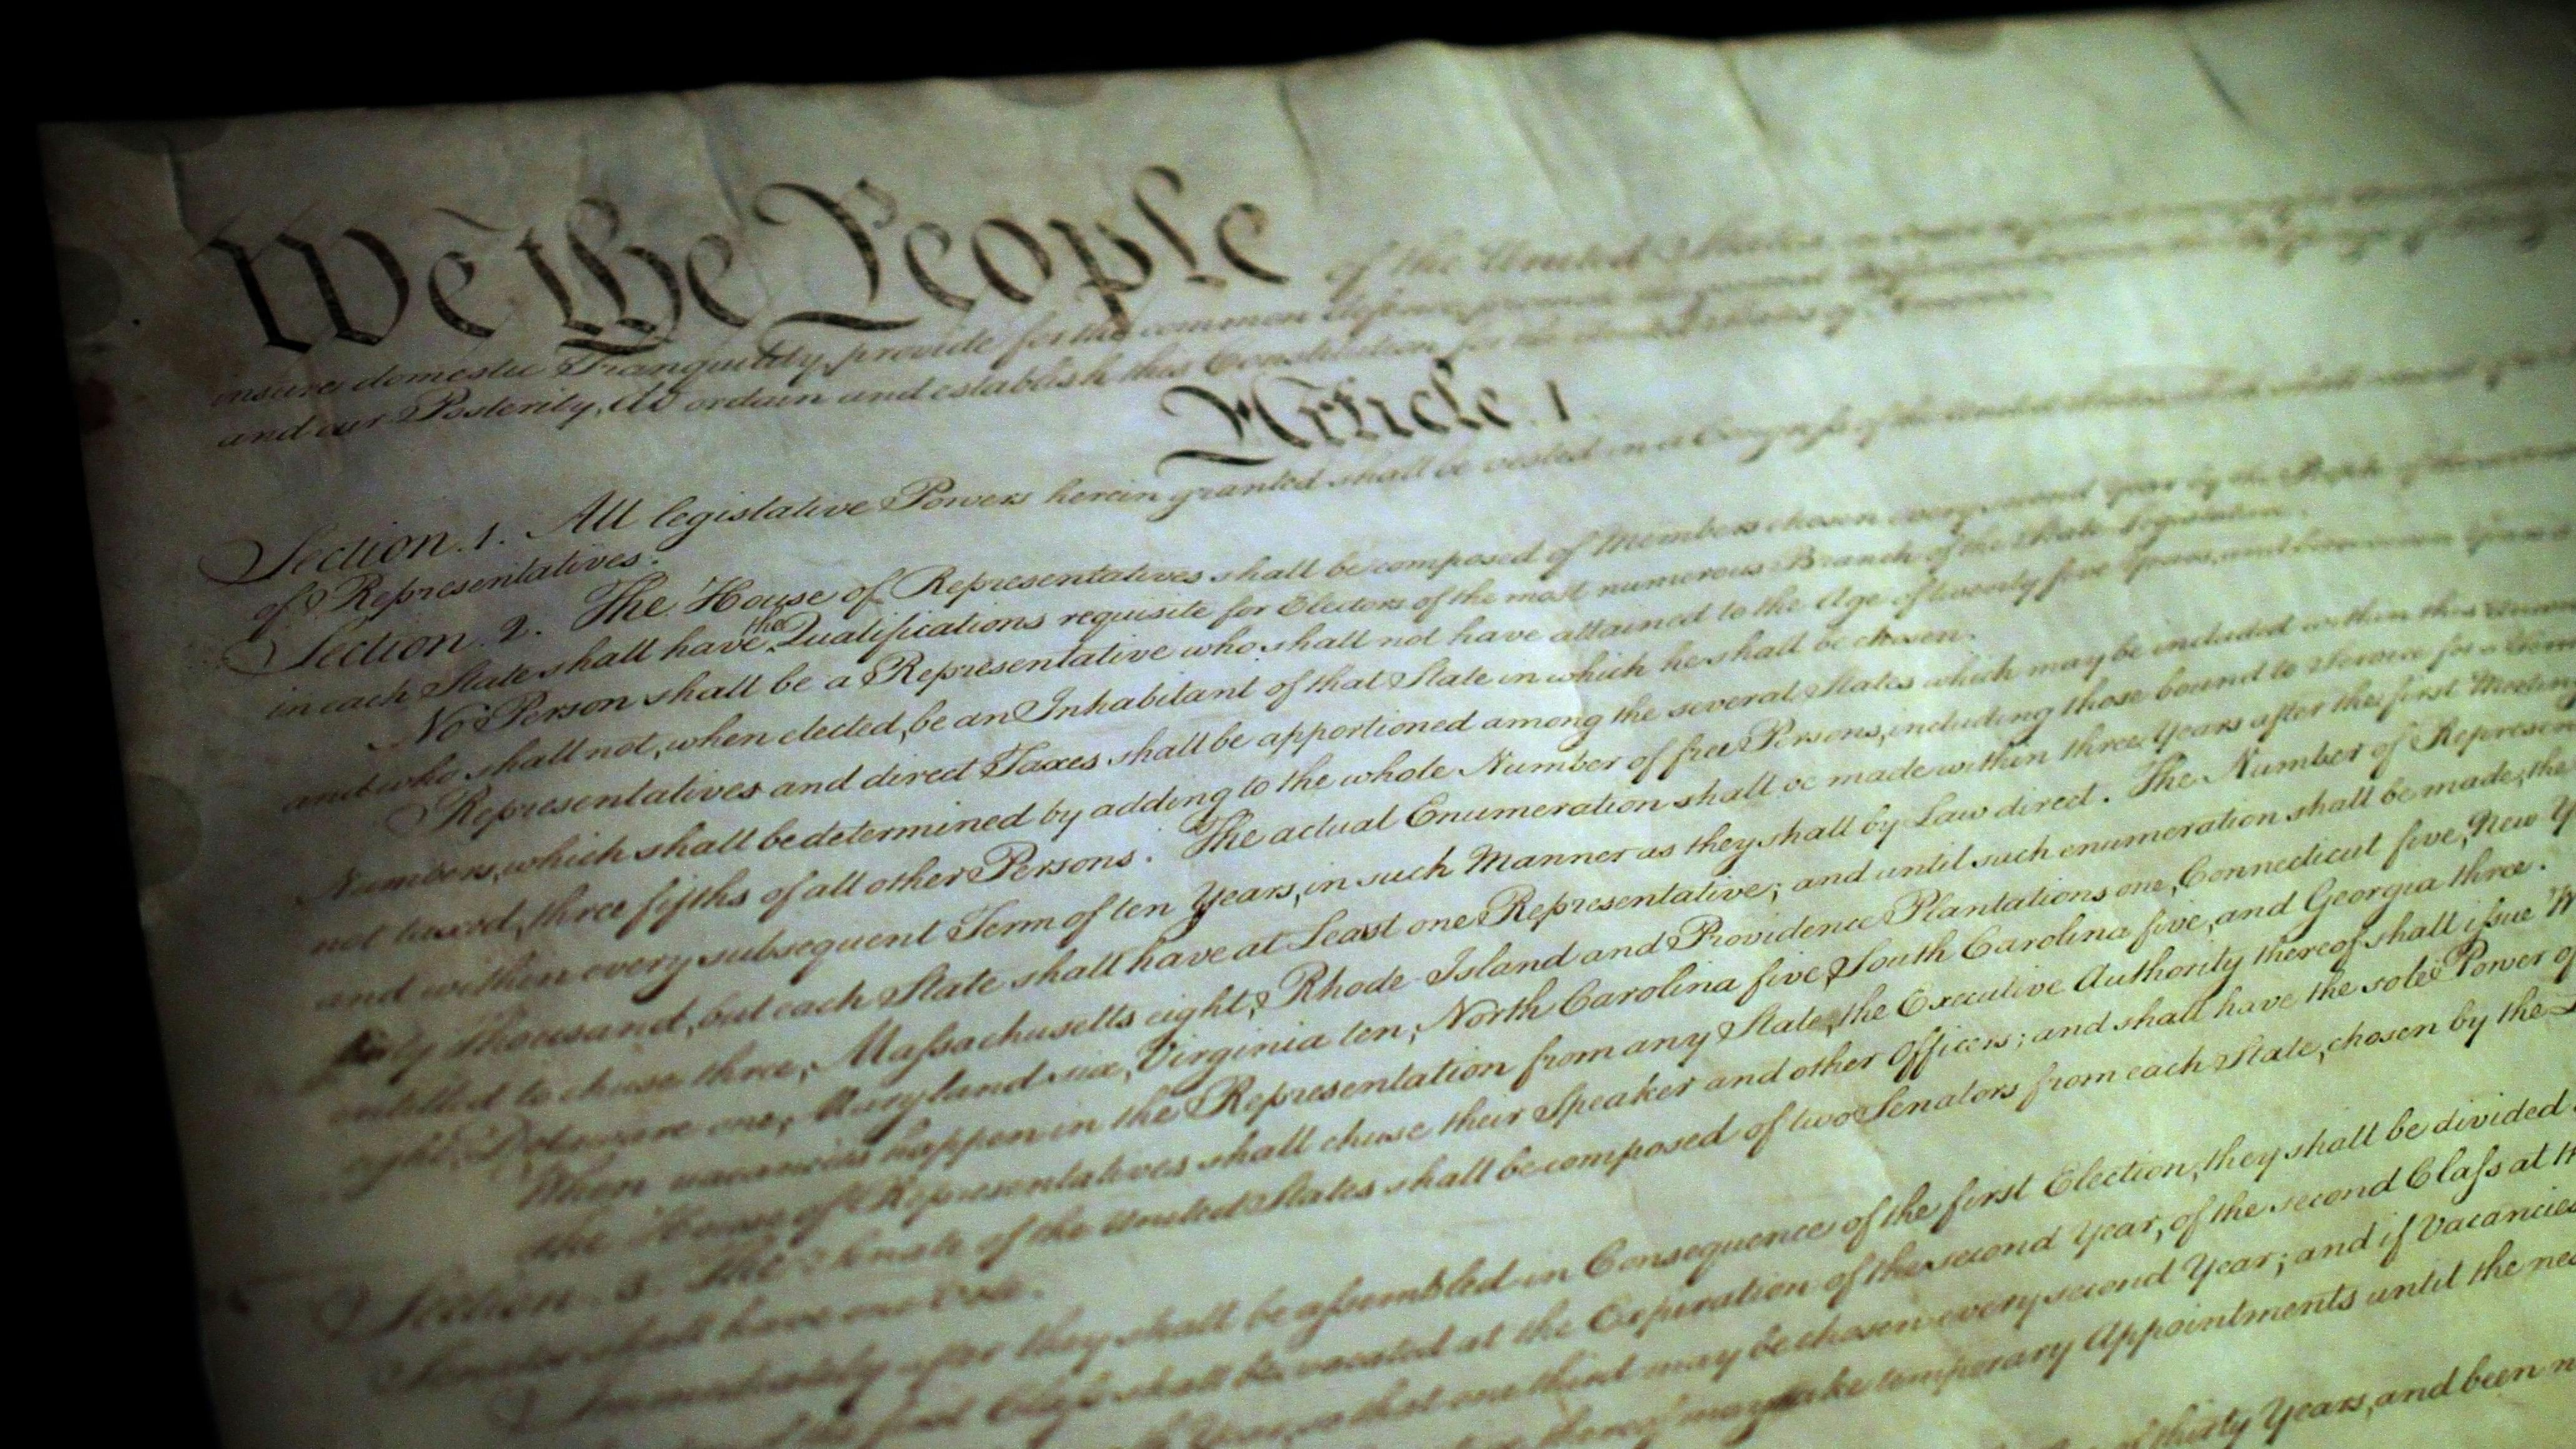 The preamble and beginning of the original Constitution in the rotunda of the National Archives in Washington, D.C.